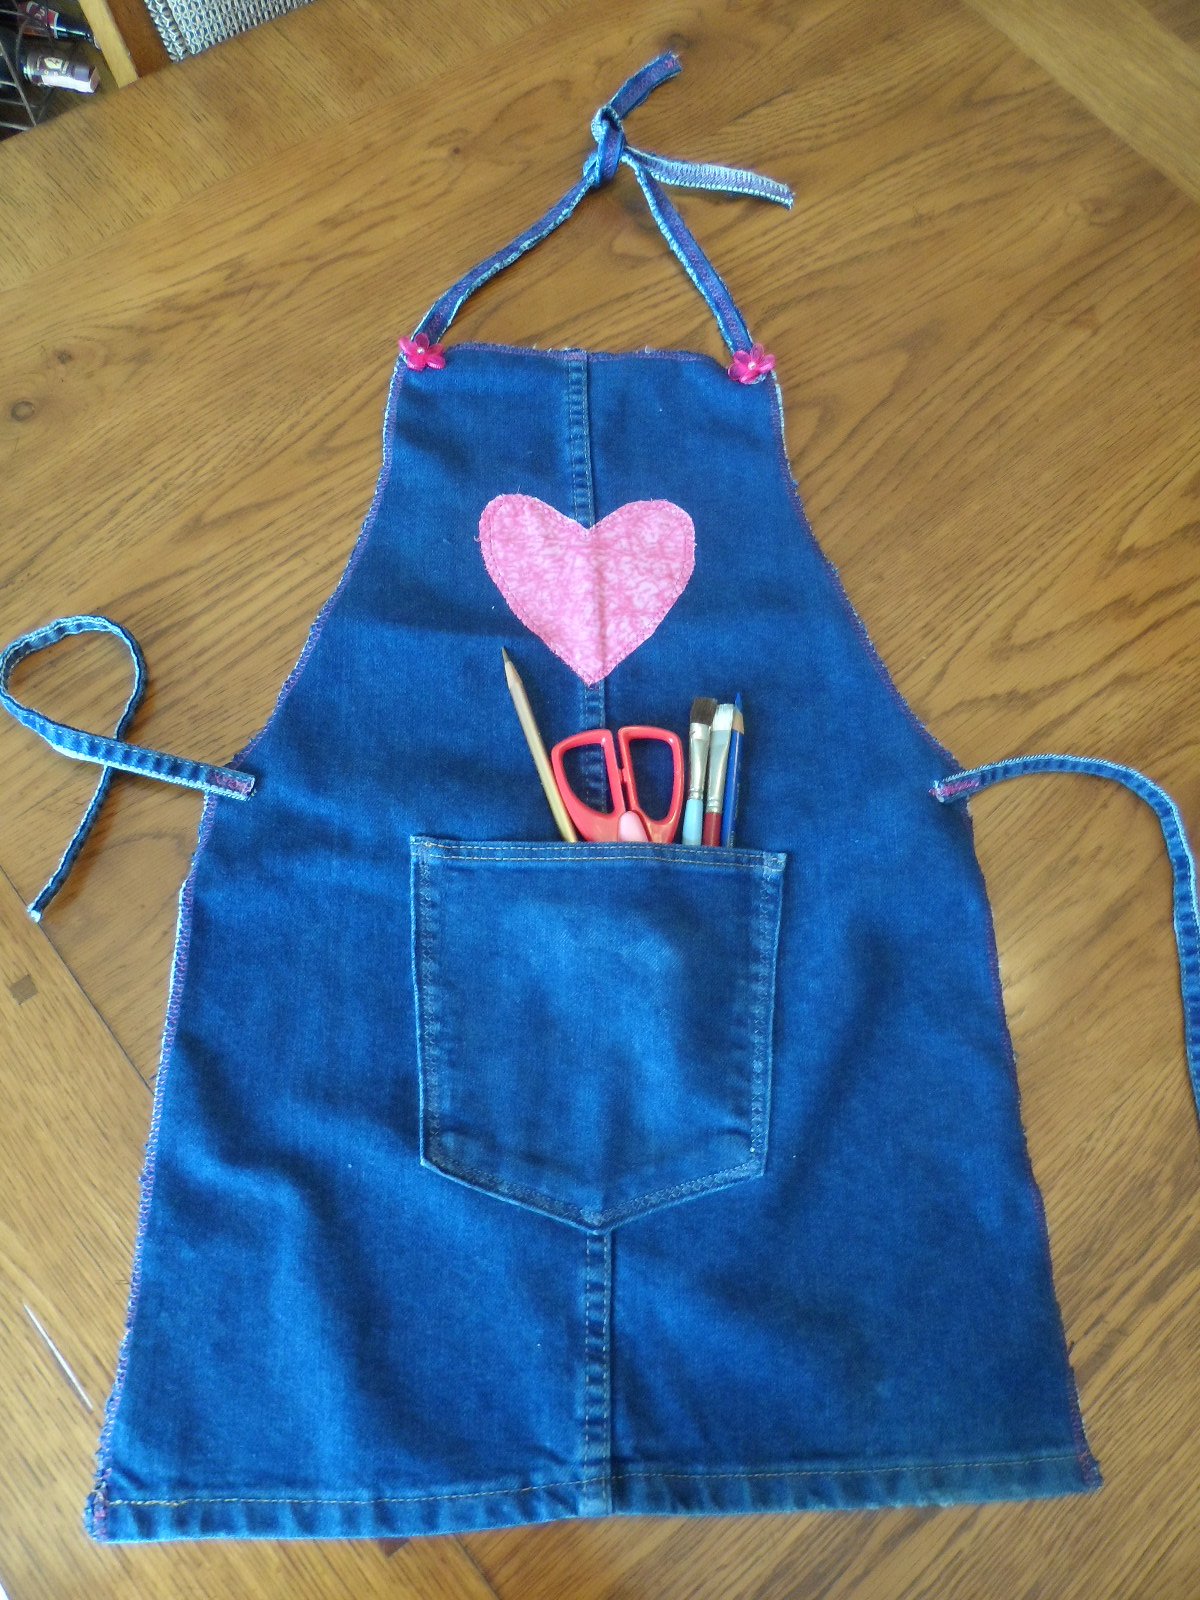 Marilyn, Childs art apron from jeans pant leg